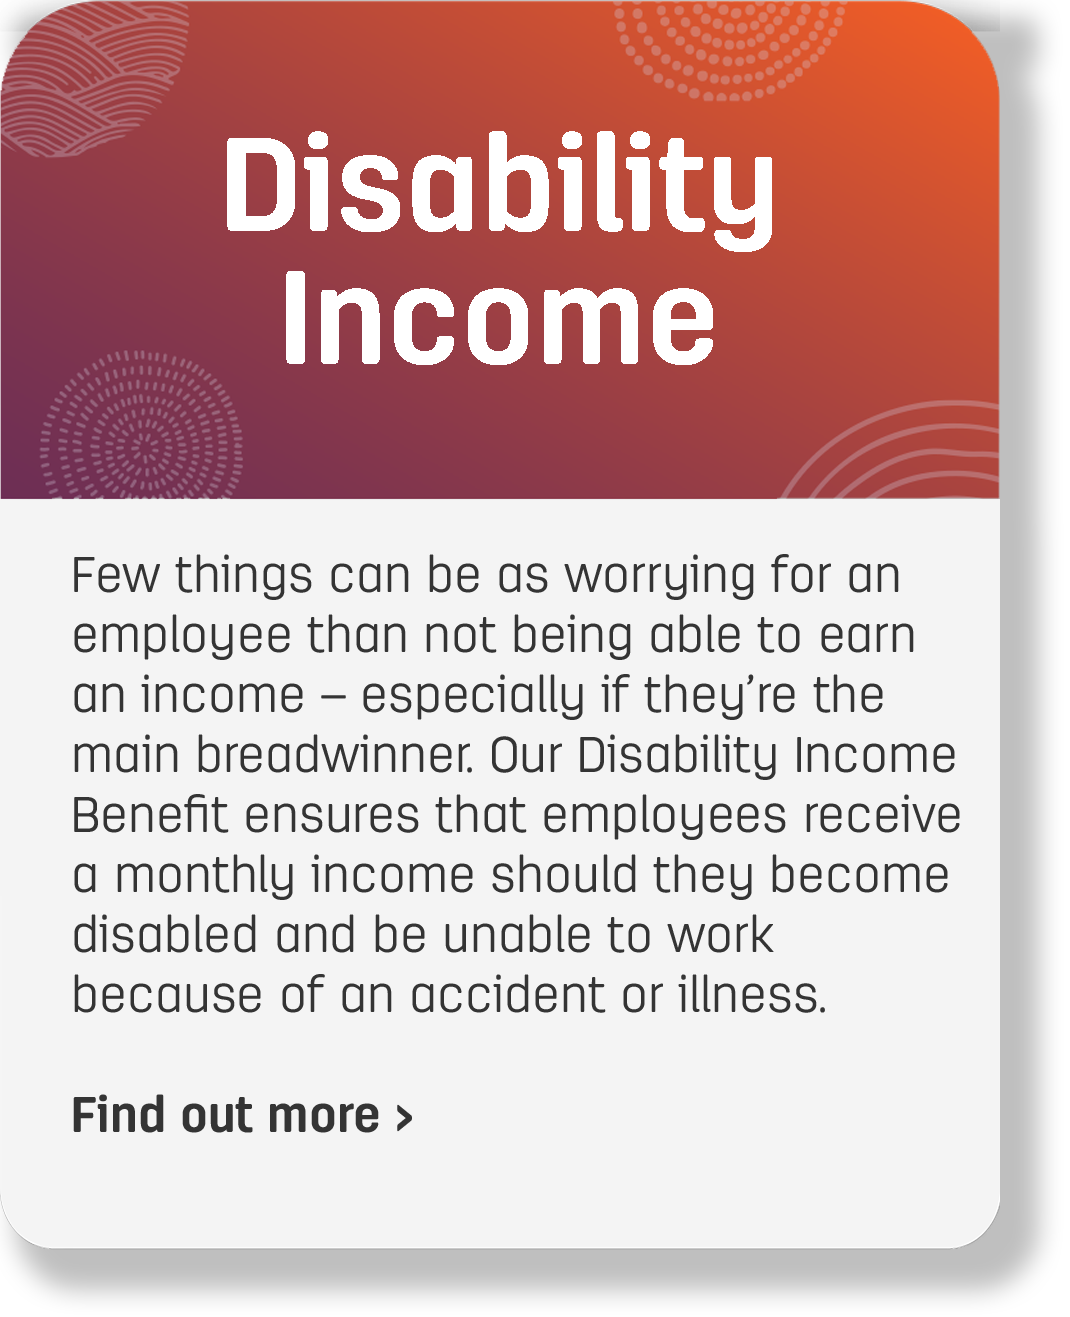 Disability income image